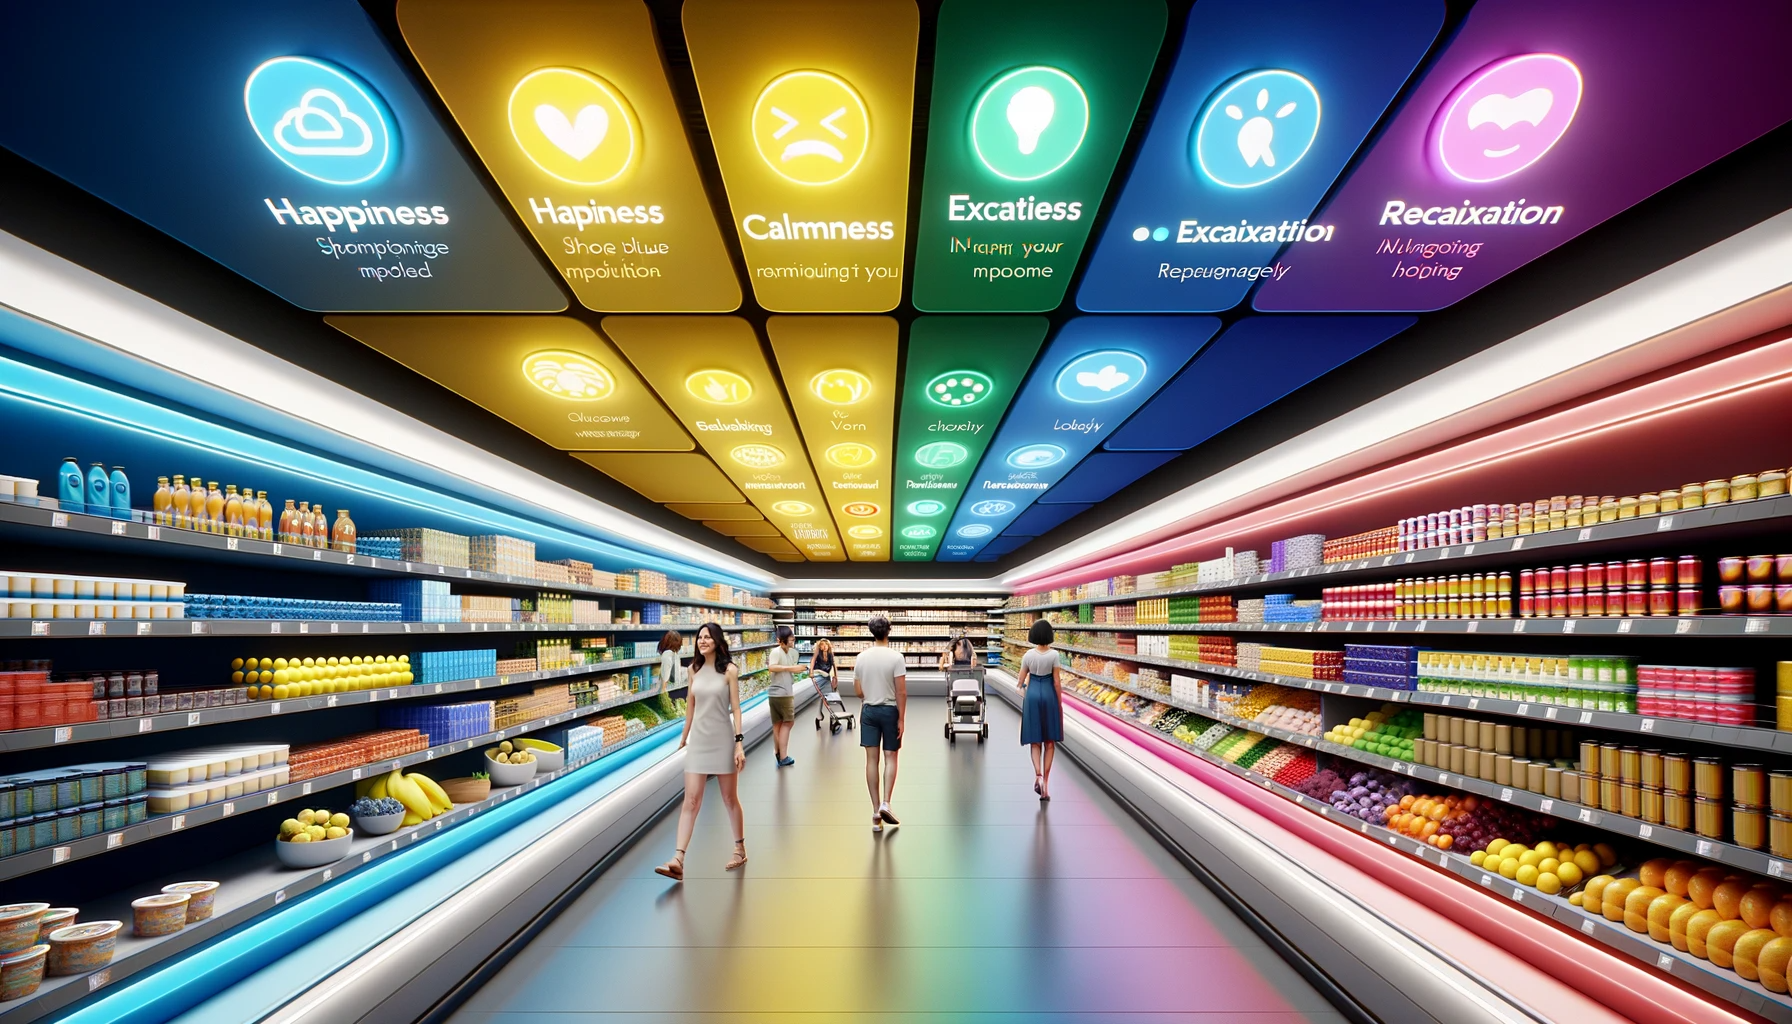 a shopping experience where each product is associated with a specific emotion